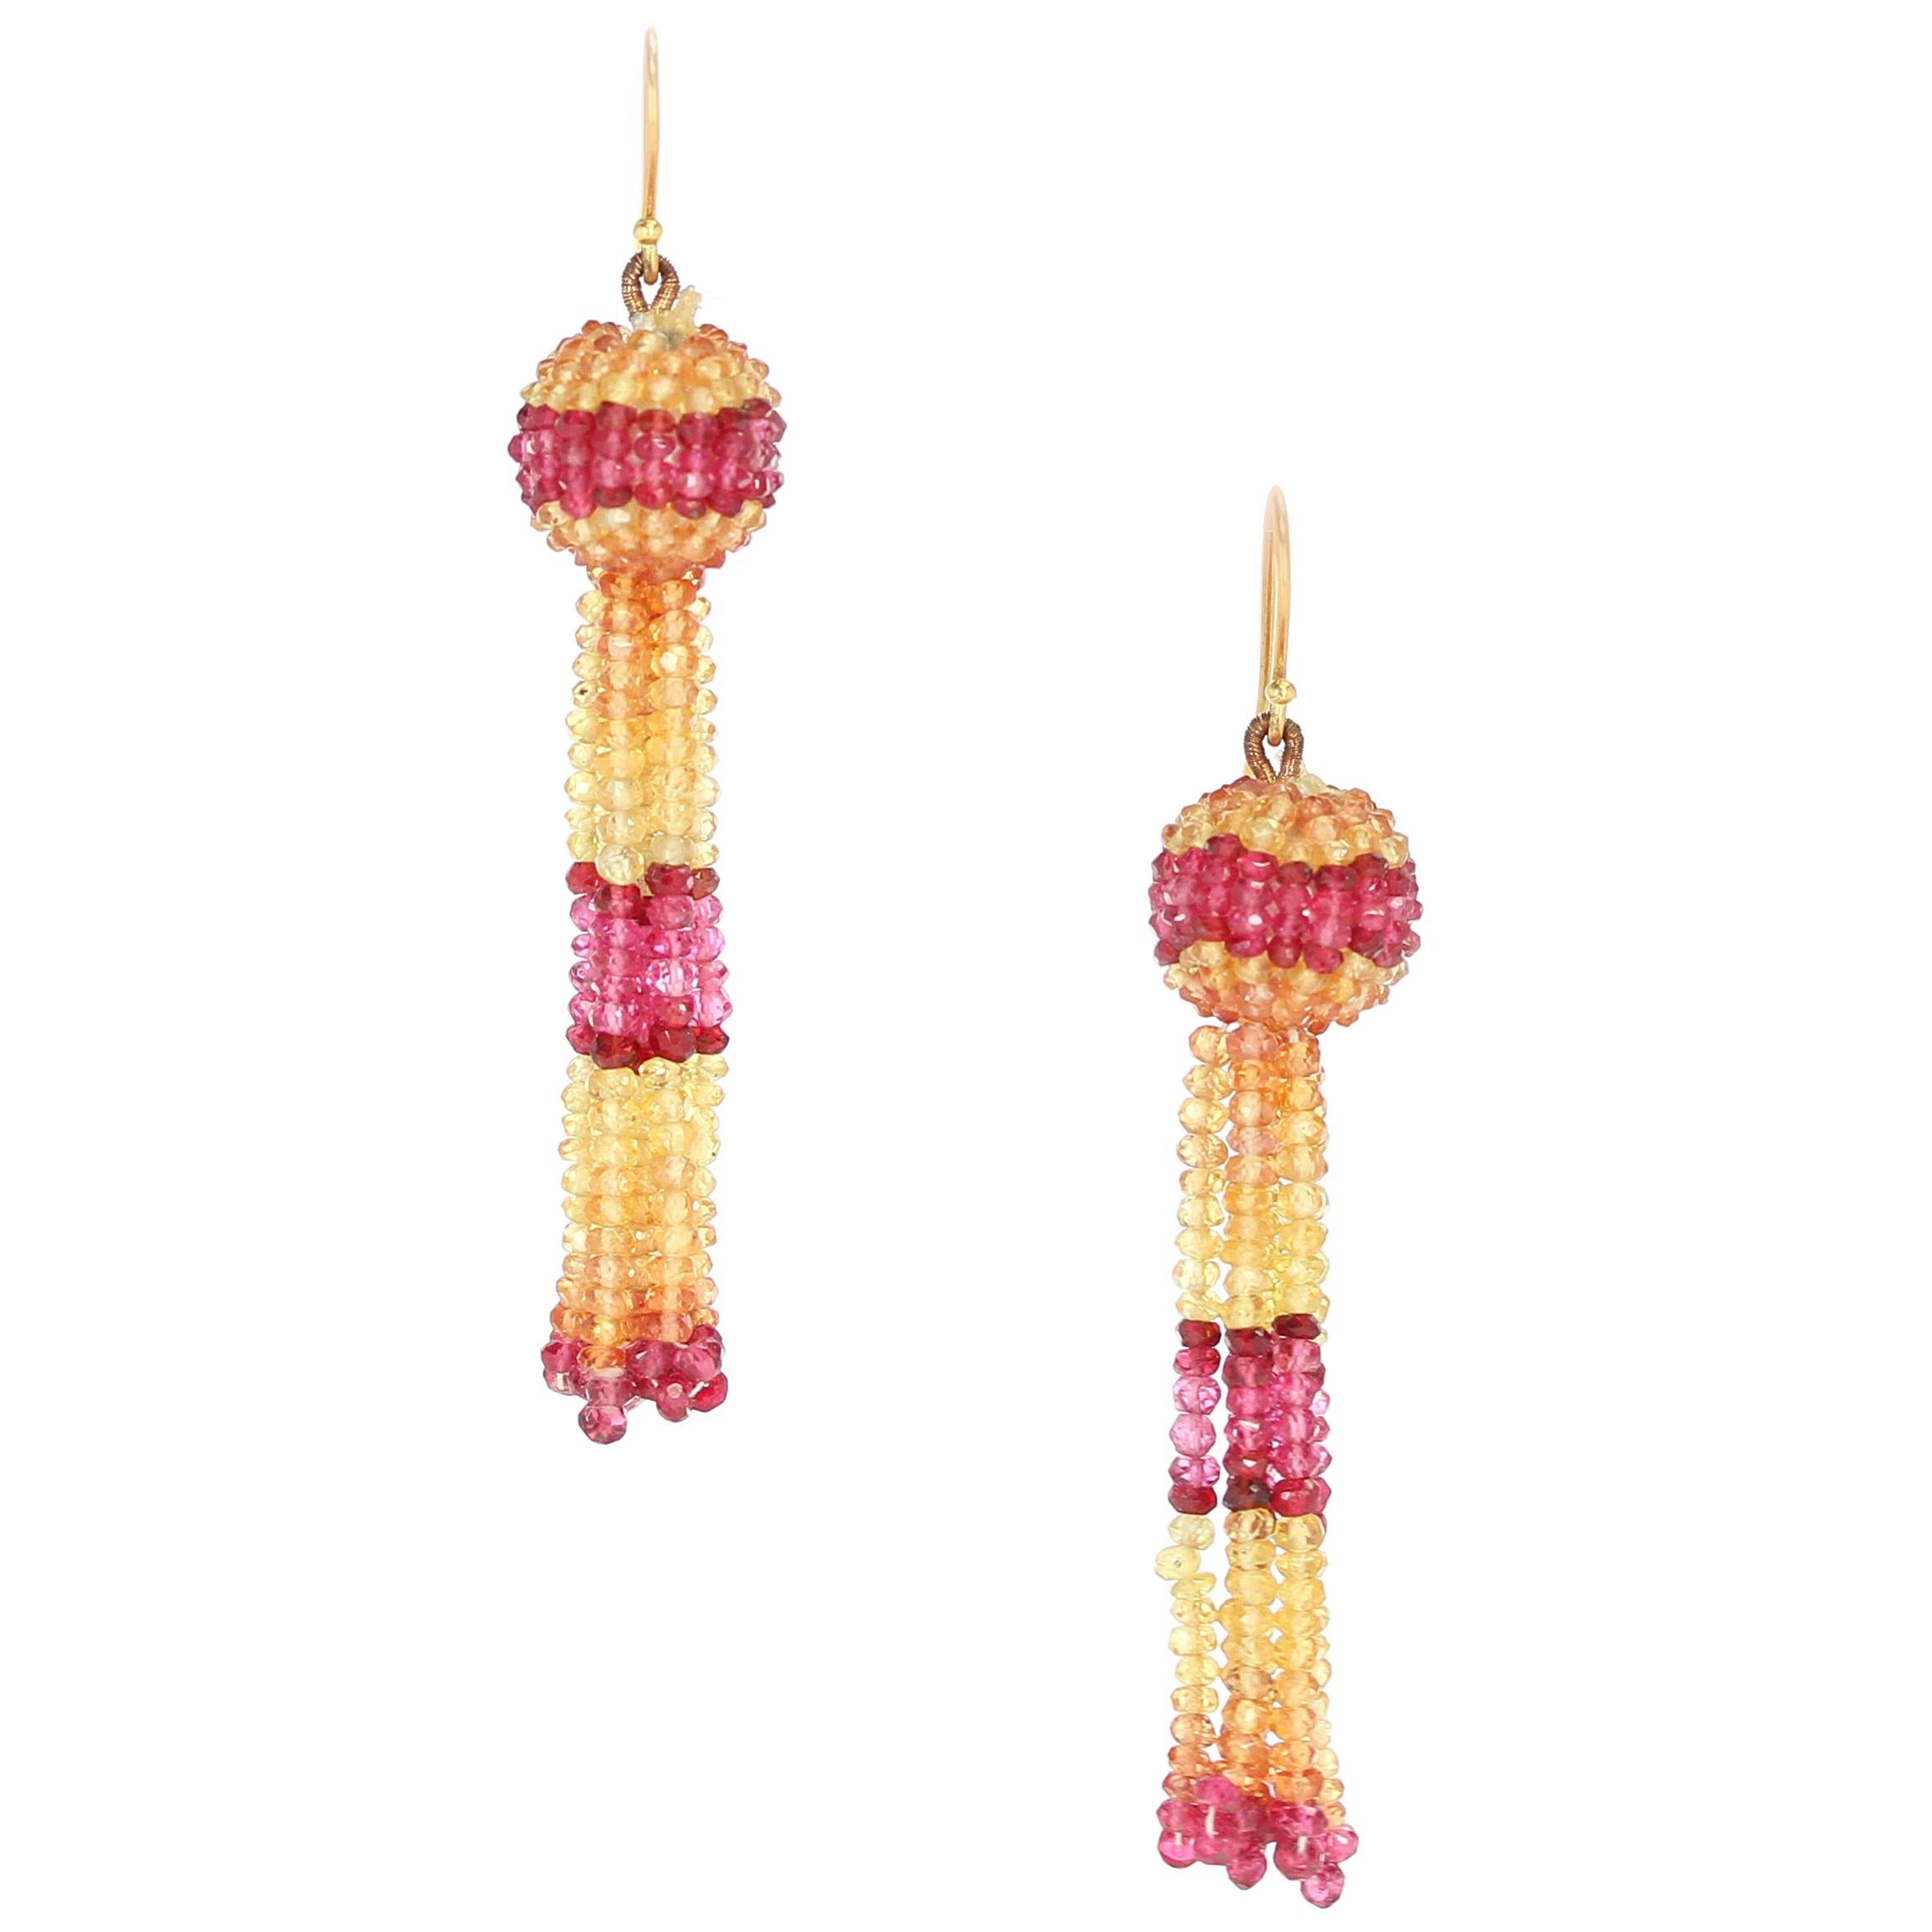 ALETTO BROTHERS Gold And Ruby Pendant Earclips Available For Immediate Sale  At Sotheby's